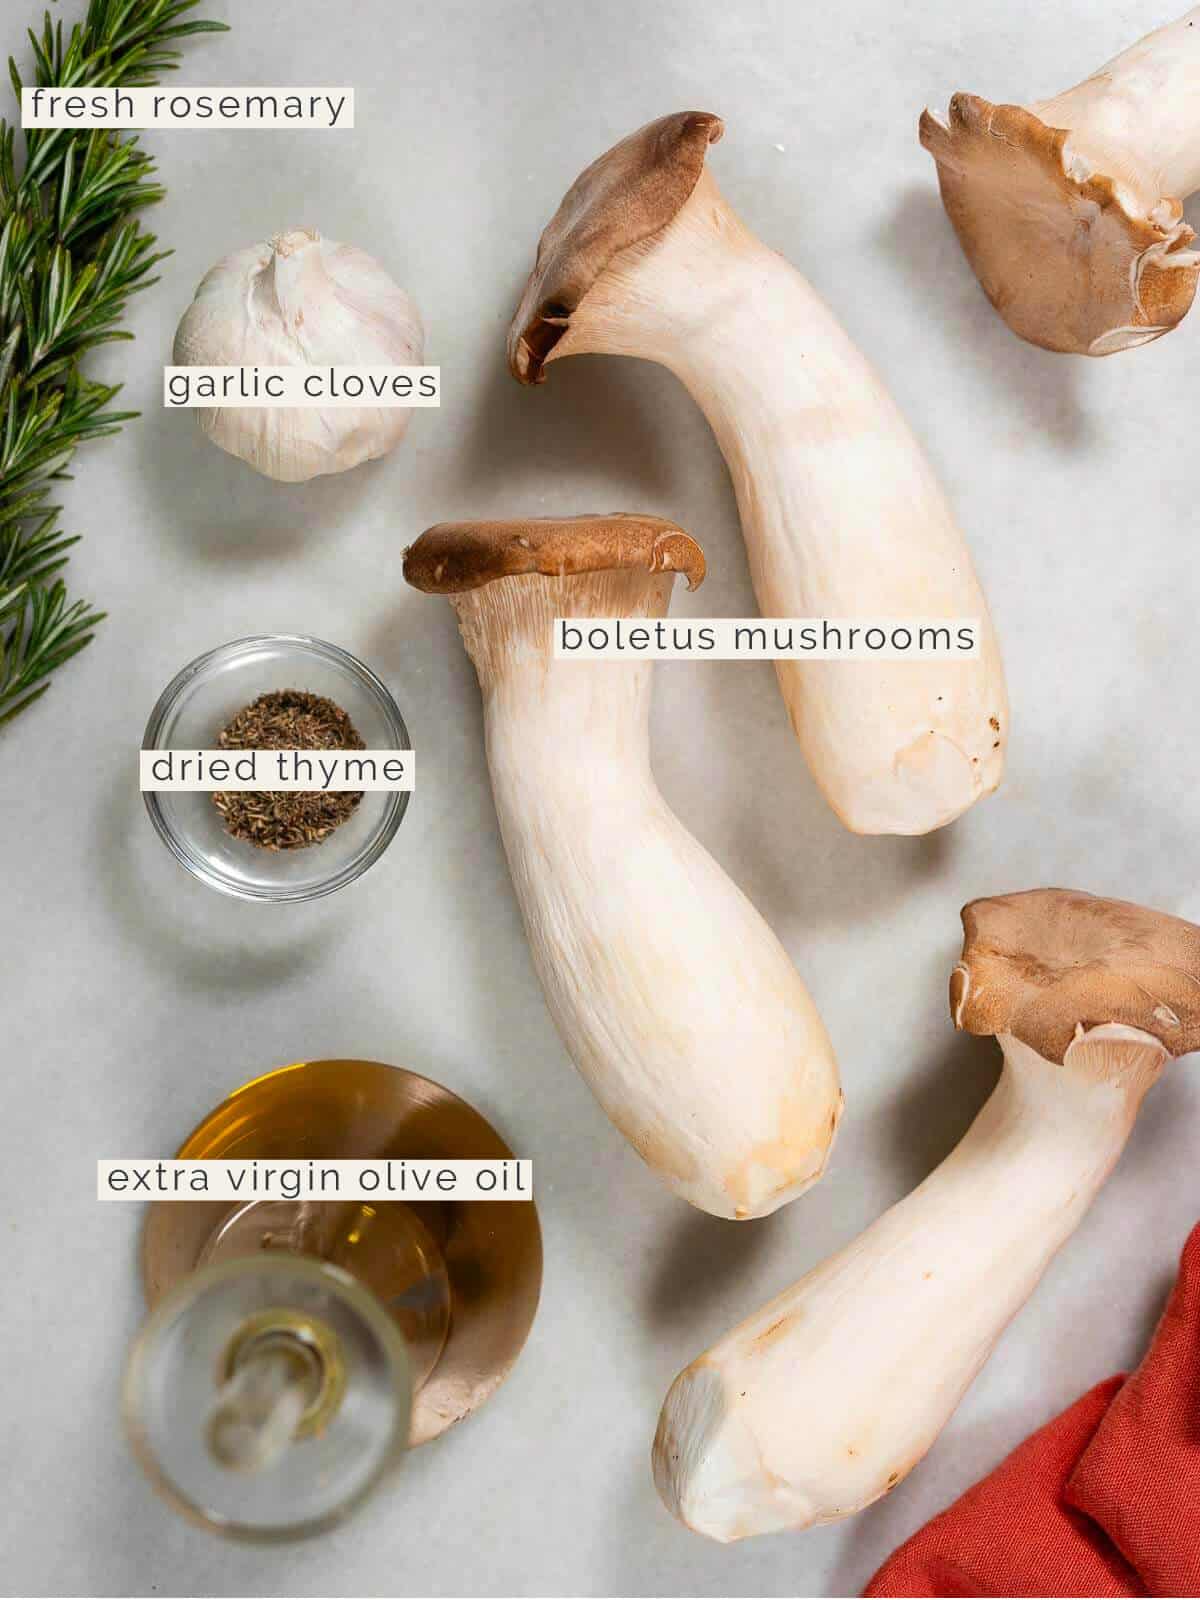 labeled ingredients to make seared mushrooms.